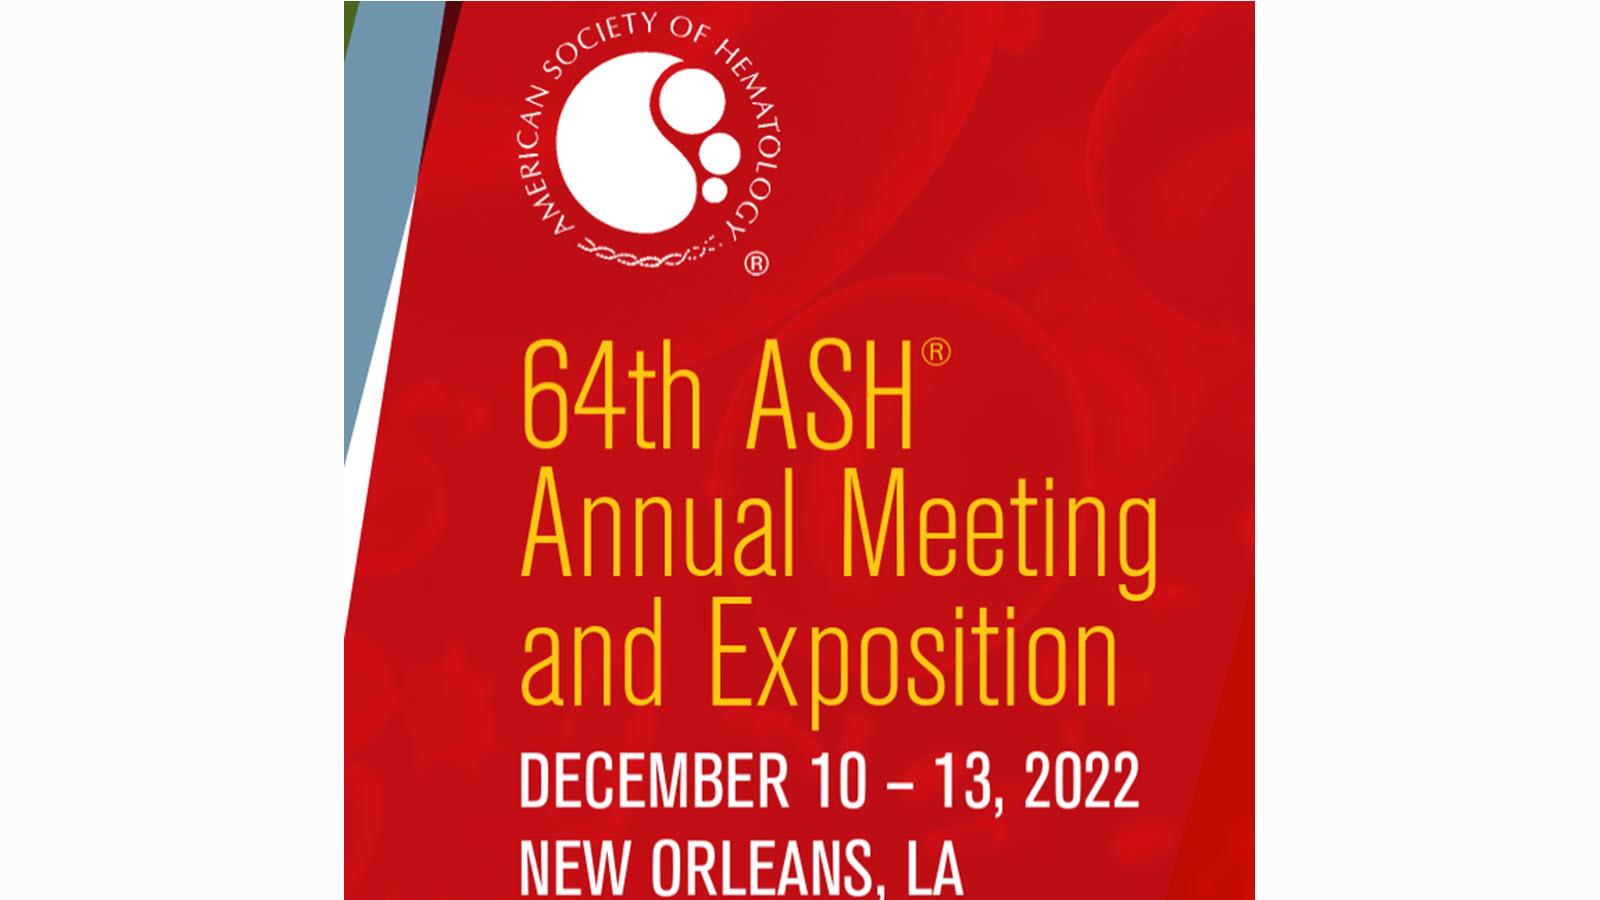 64th Annual Meeting and Exposition of the American Society of Hematology